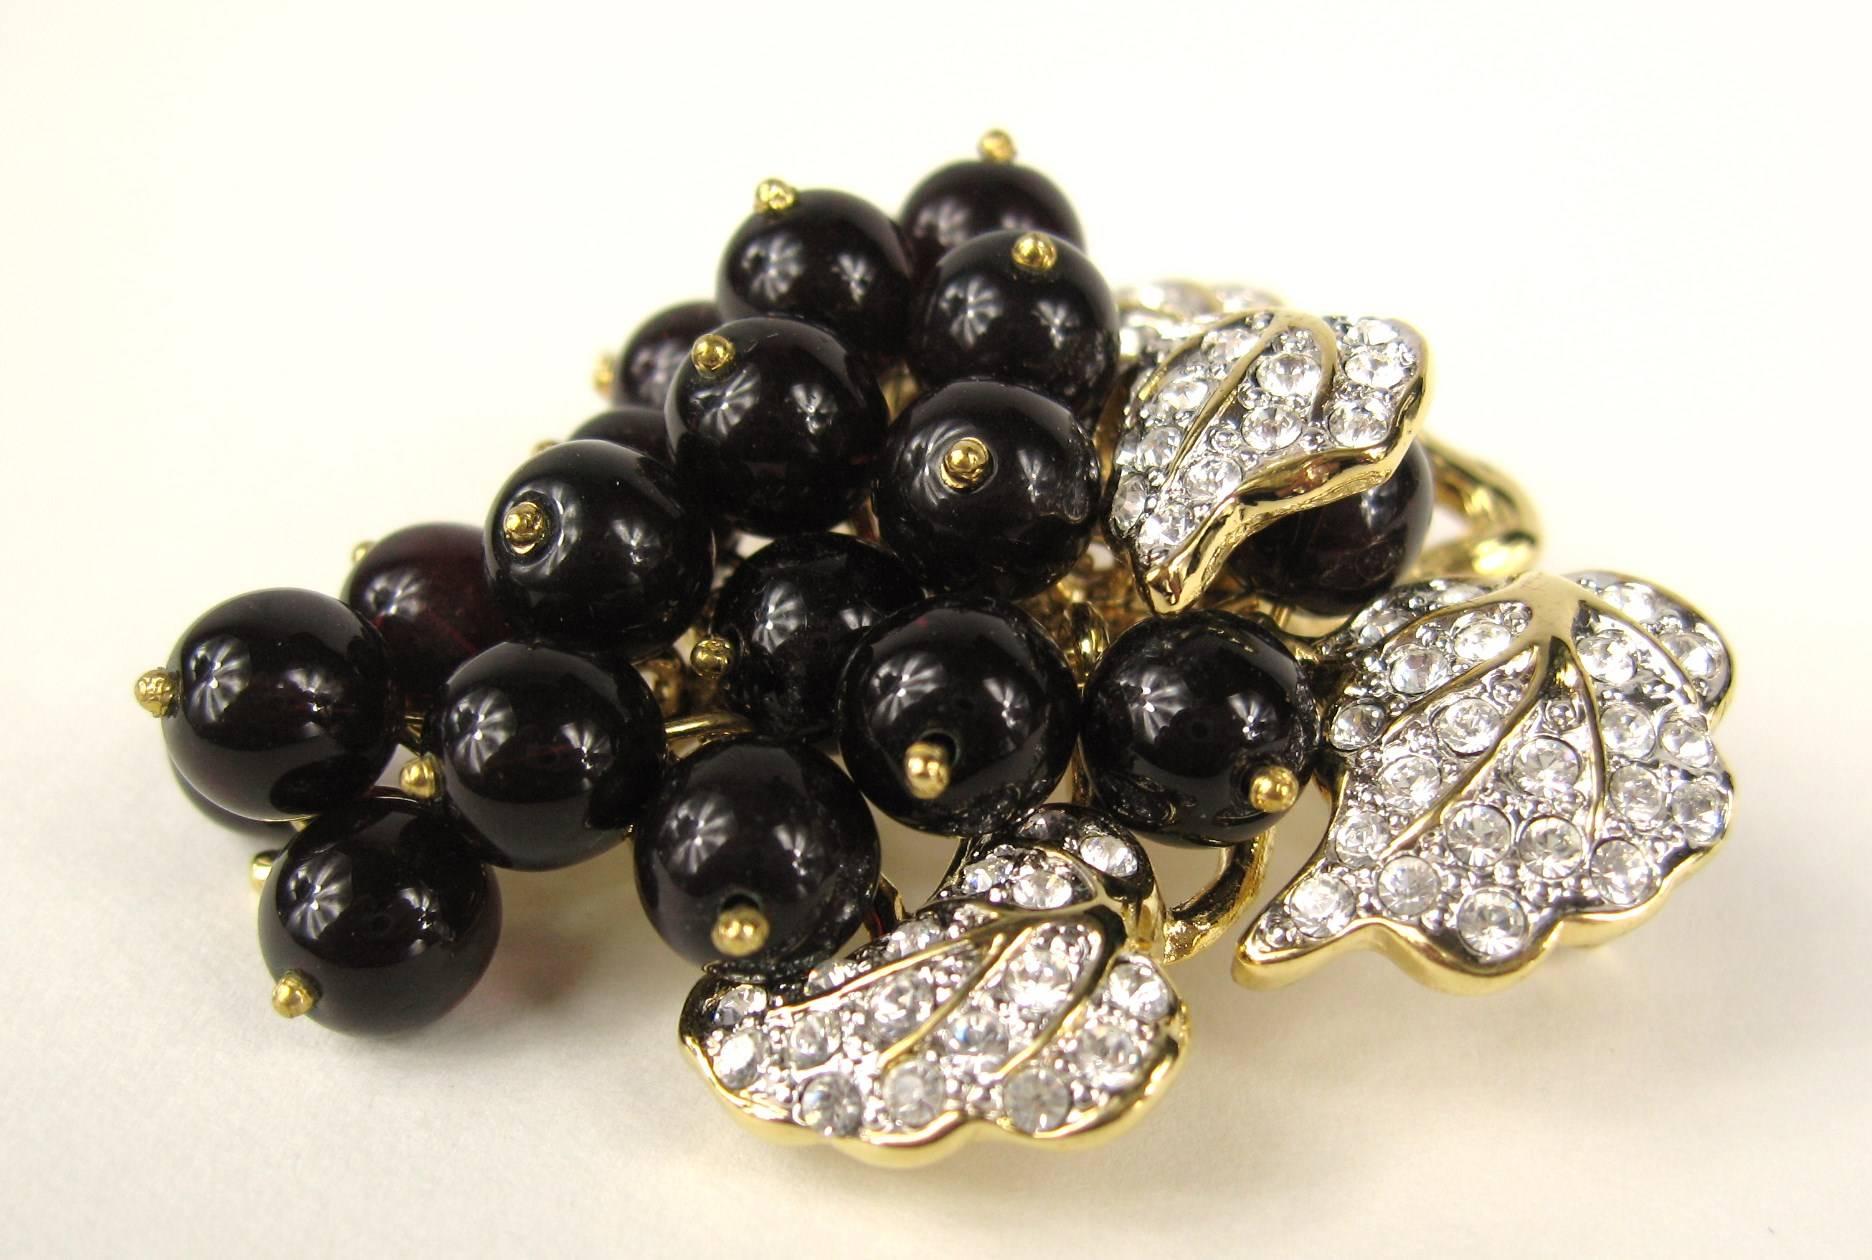 Deep rich glass beads make up the grapes on this vintage Nolan Miller brooch with Pave and prong set crystals are set in the leaves. Measures 2.30 inches Top to bottom  x 2 inches wide. Hallmarked Nolan Miller on the backside. This is out of a